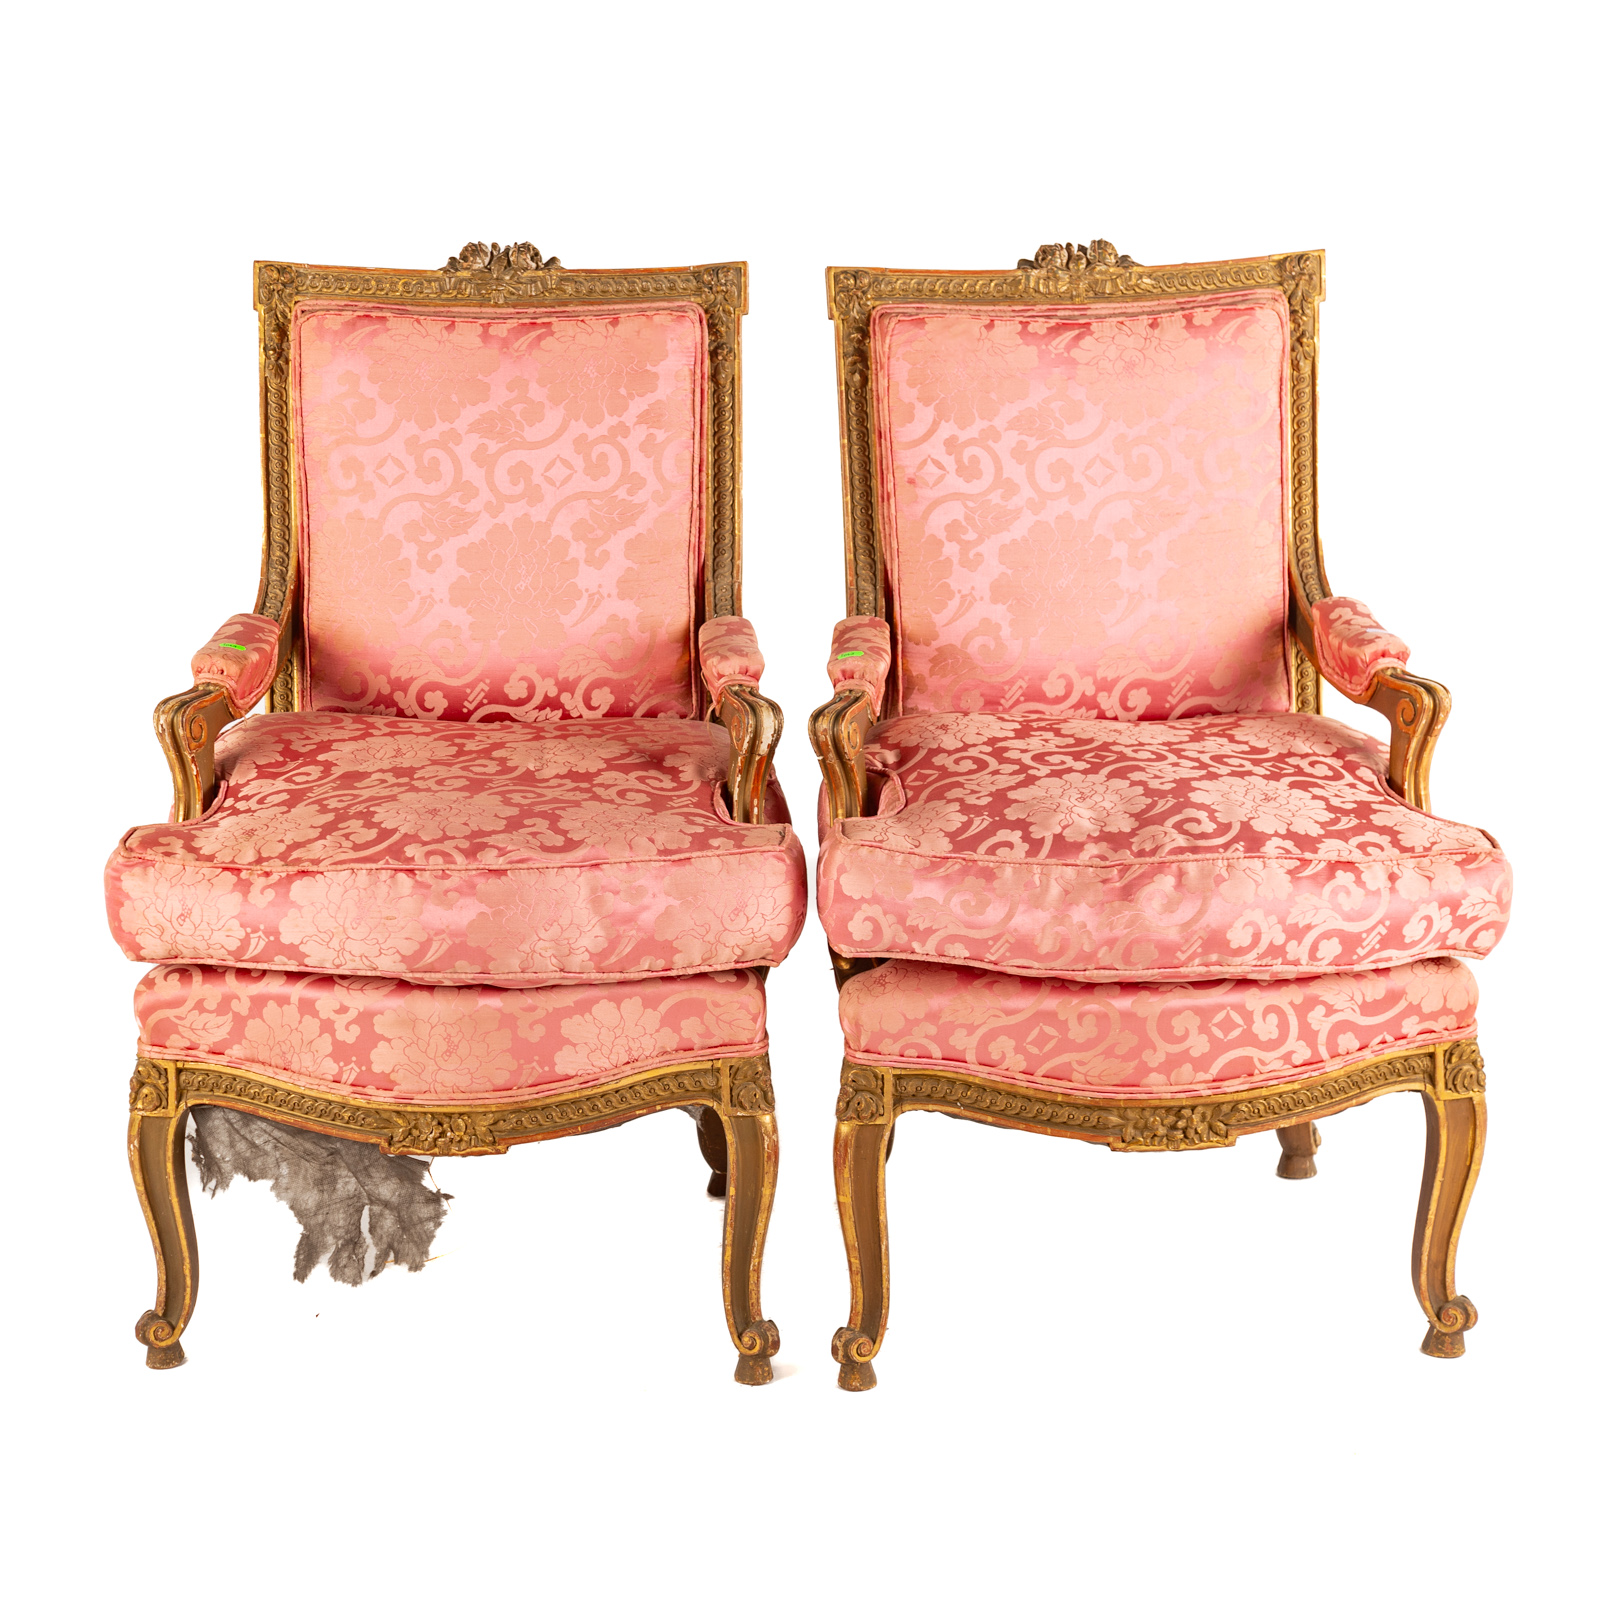 PAIR OF LOUIS XV GILTWOOD ARM CHAIRS